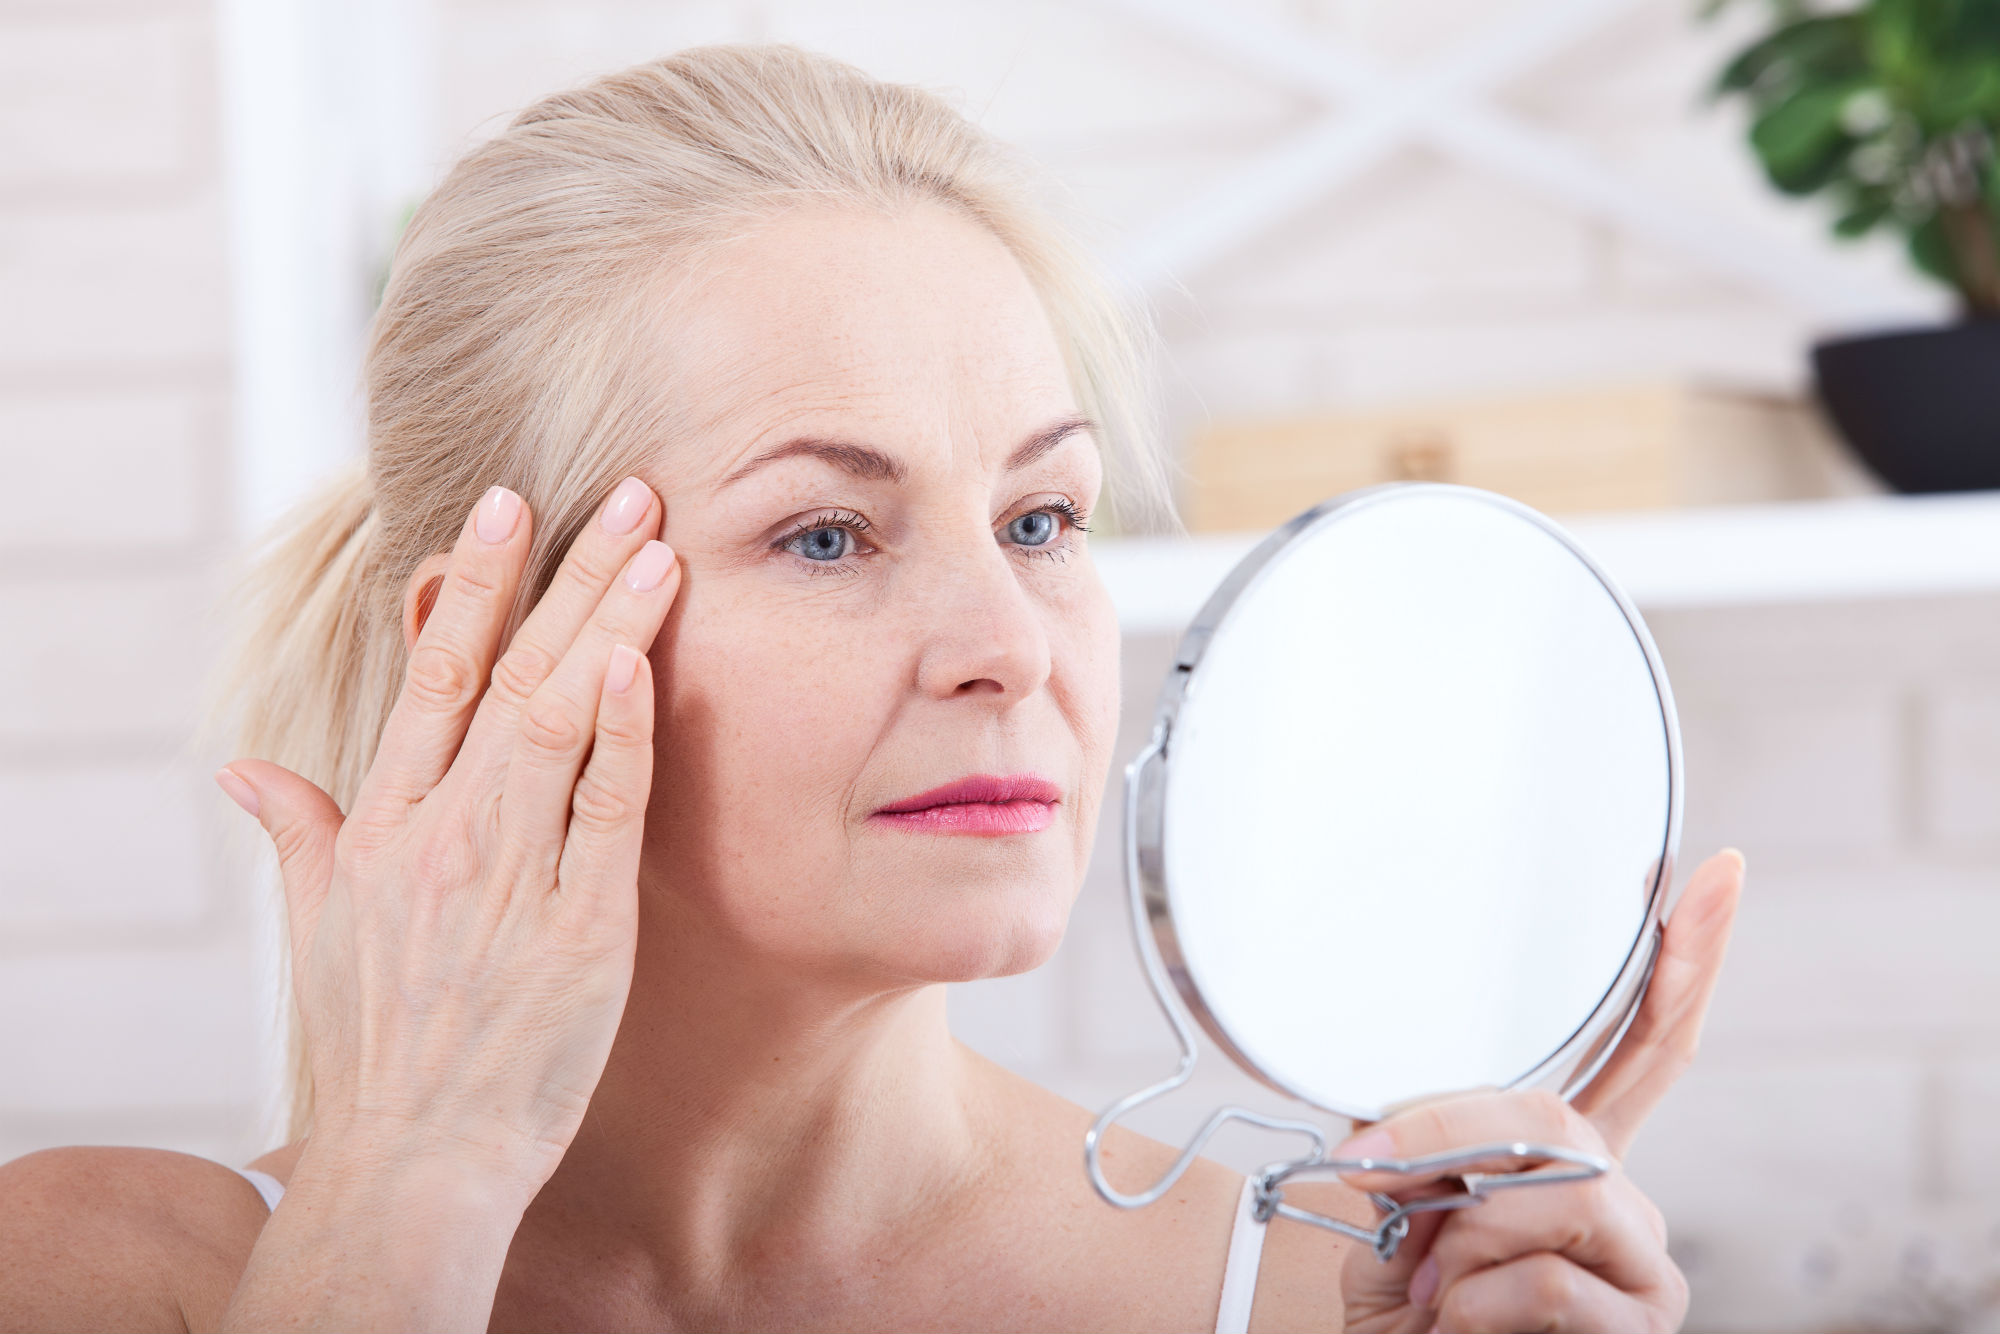 Collagen reduces skin dryness and wrinkles #1